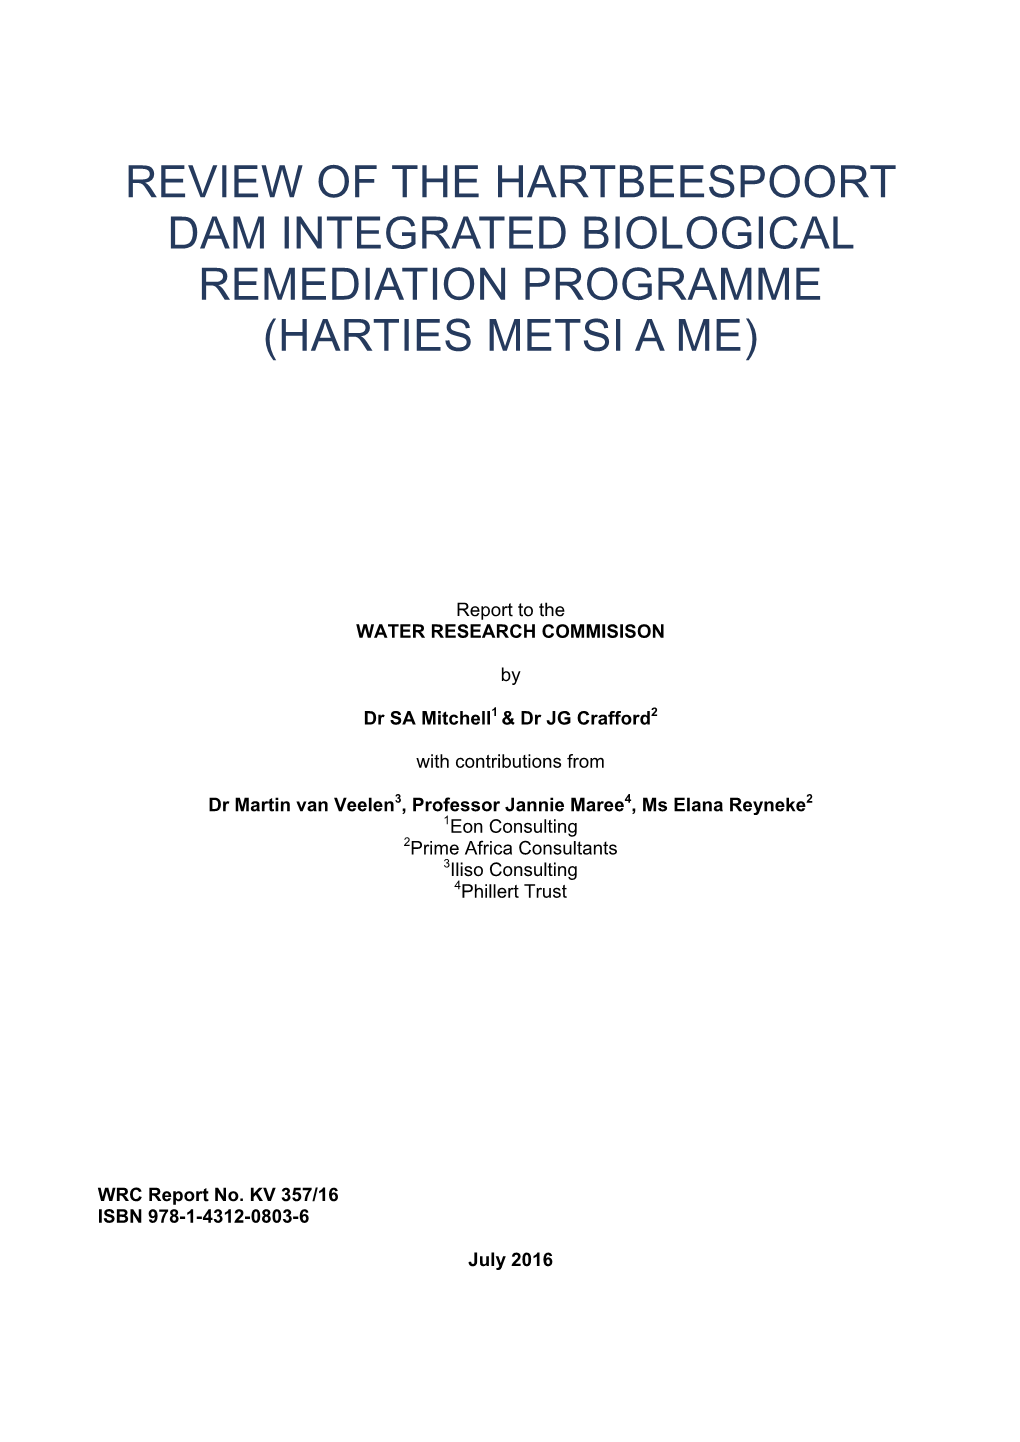 Review of the Hartbeespoort Dam Integrated Biological Remediation Programme (Harties Metsi a Me)